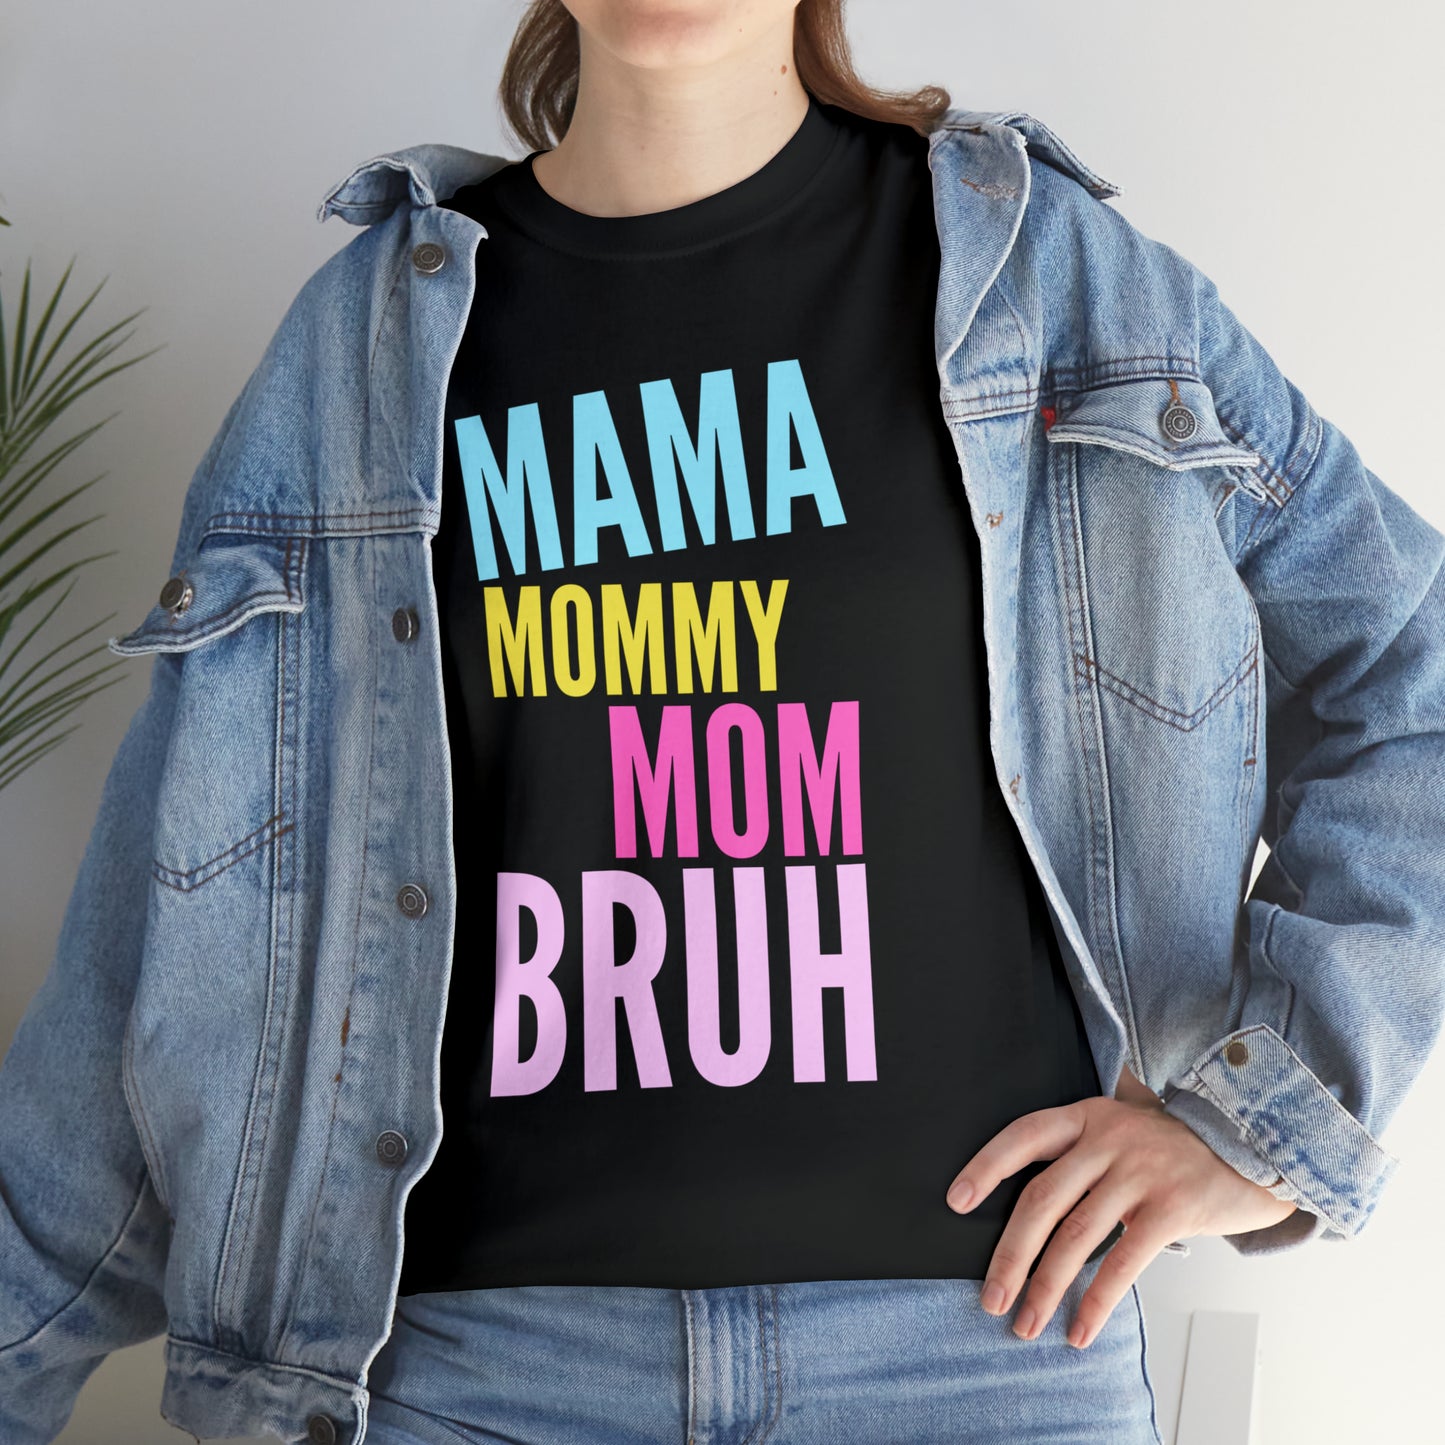 Premium quality shirts for mothers